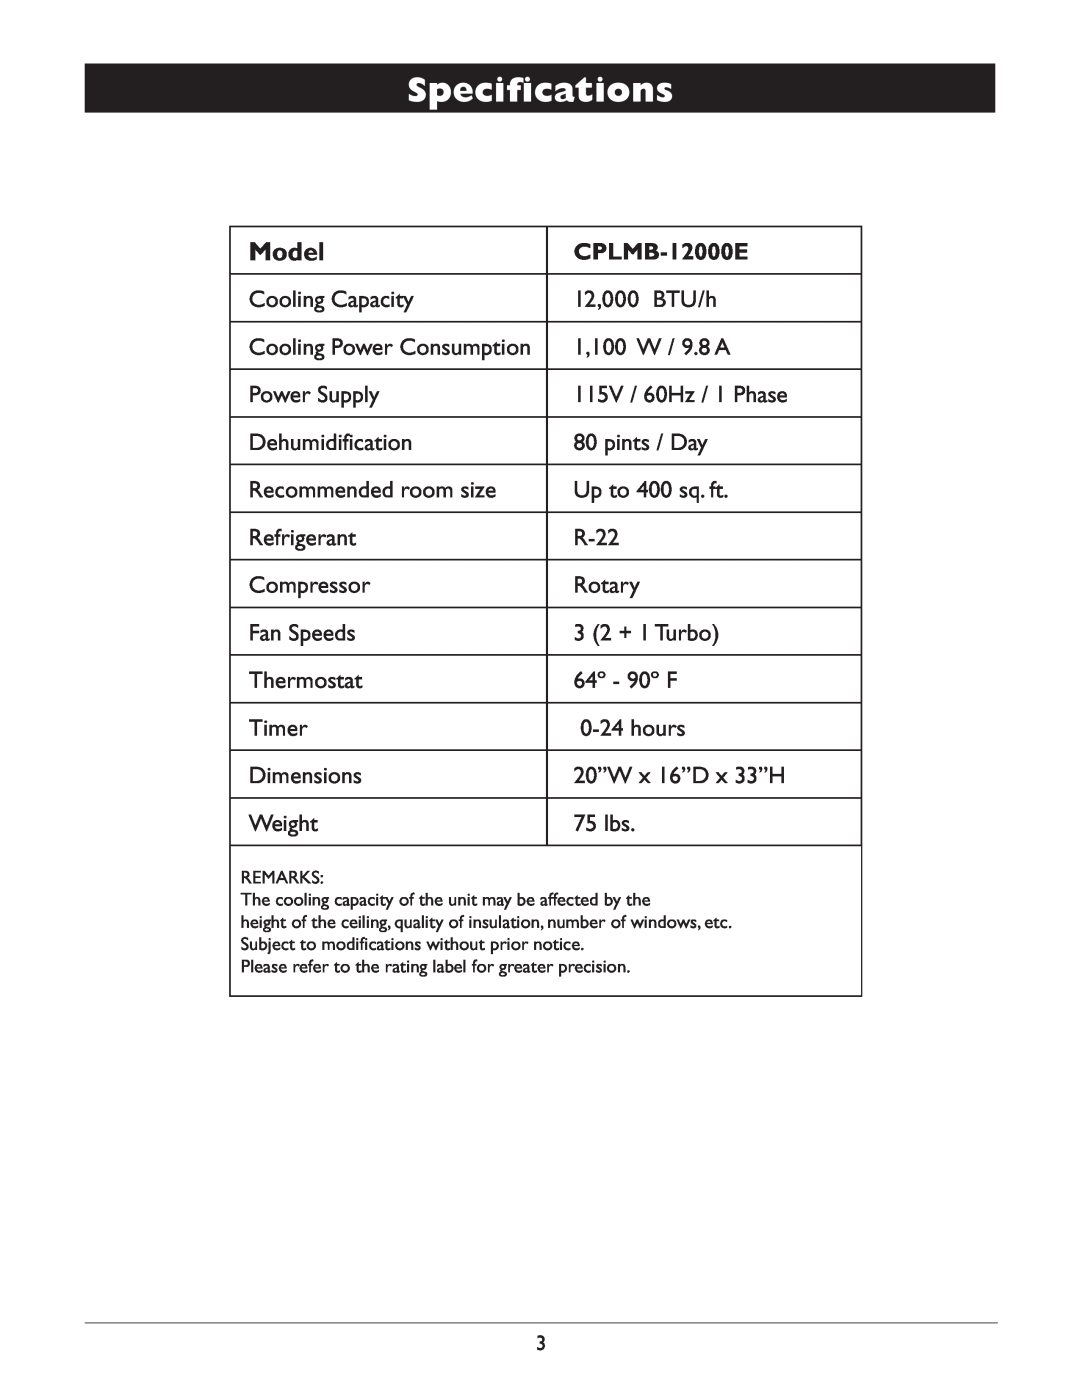 Amcor CPLMB-12000E owner manual Specifications, Model 